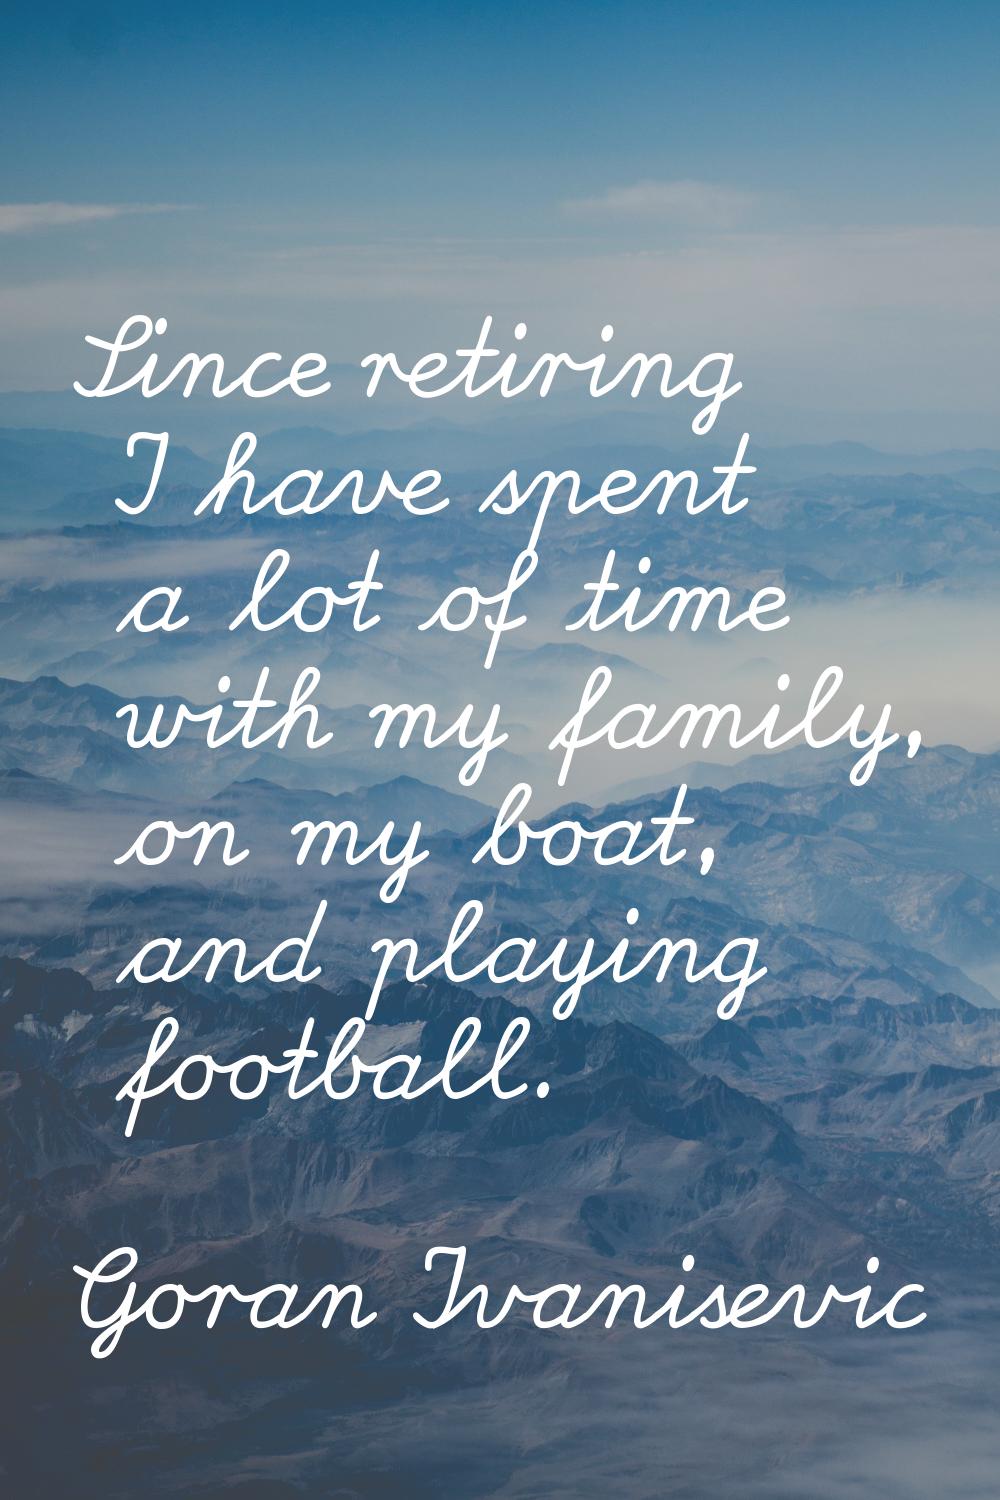 Since retiring I have spent a lot of time with my family, on my boat, and playing football.